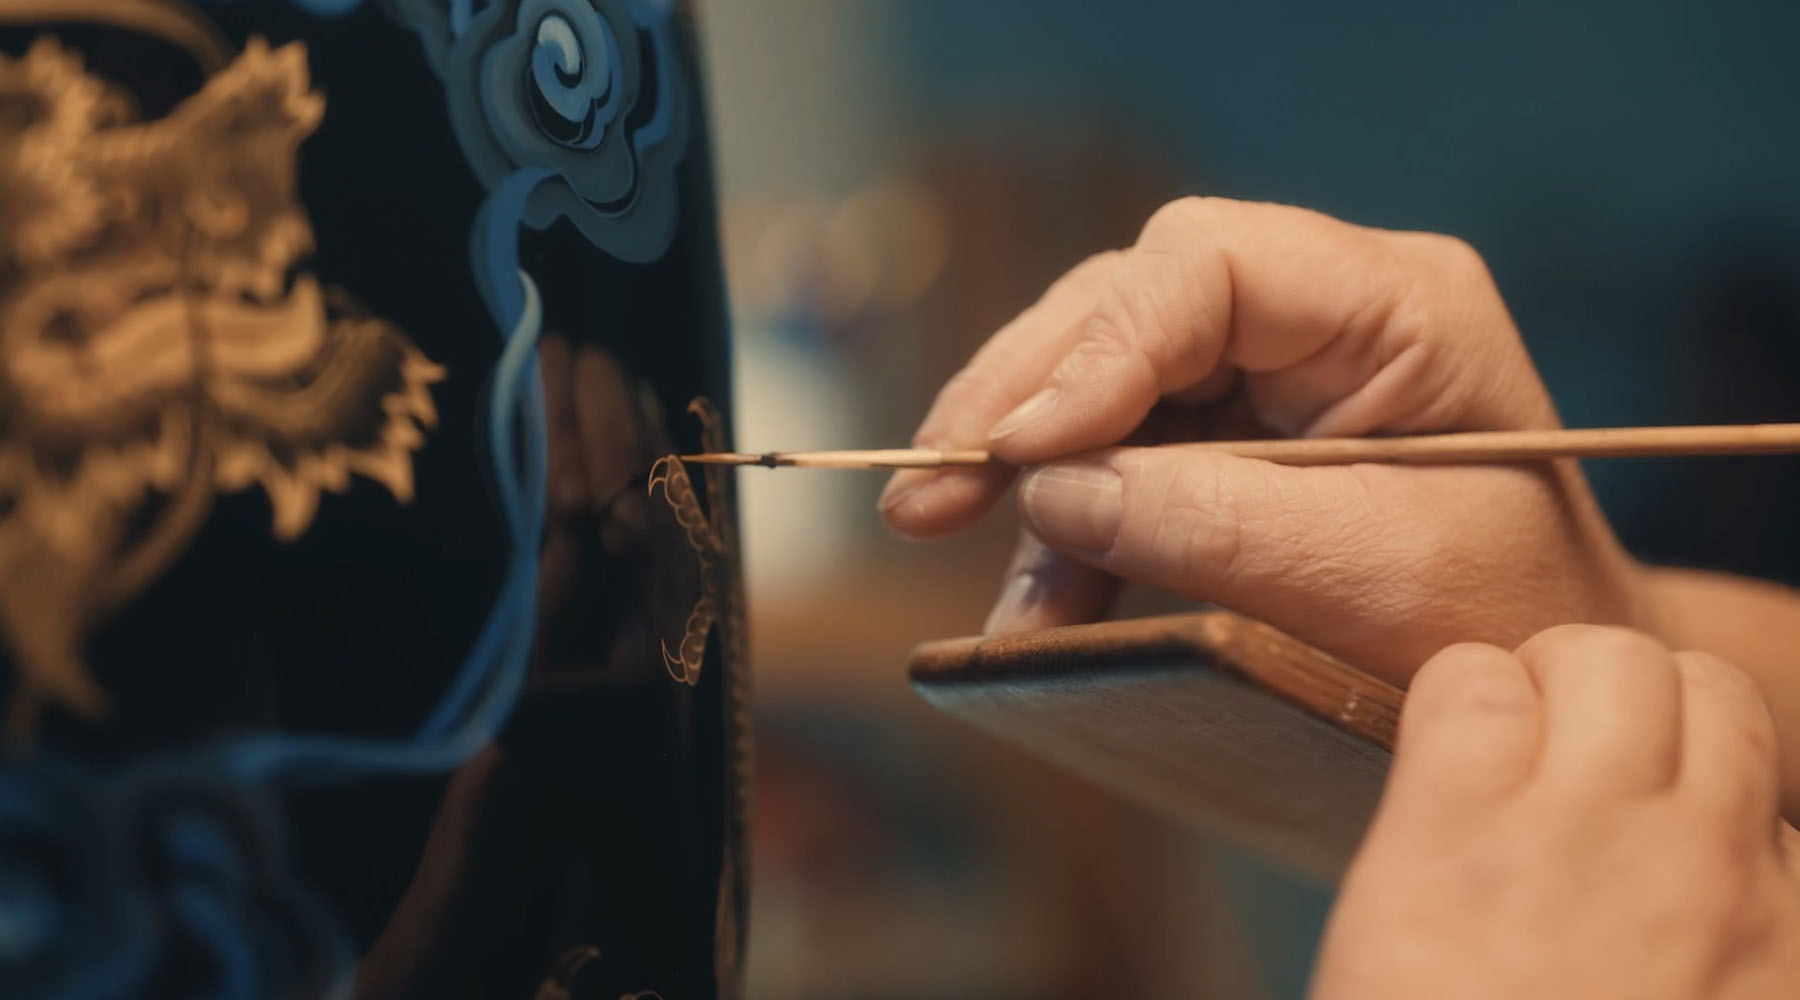 Load video: Meissen, the oldest porcelain manufactory in Europe